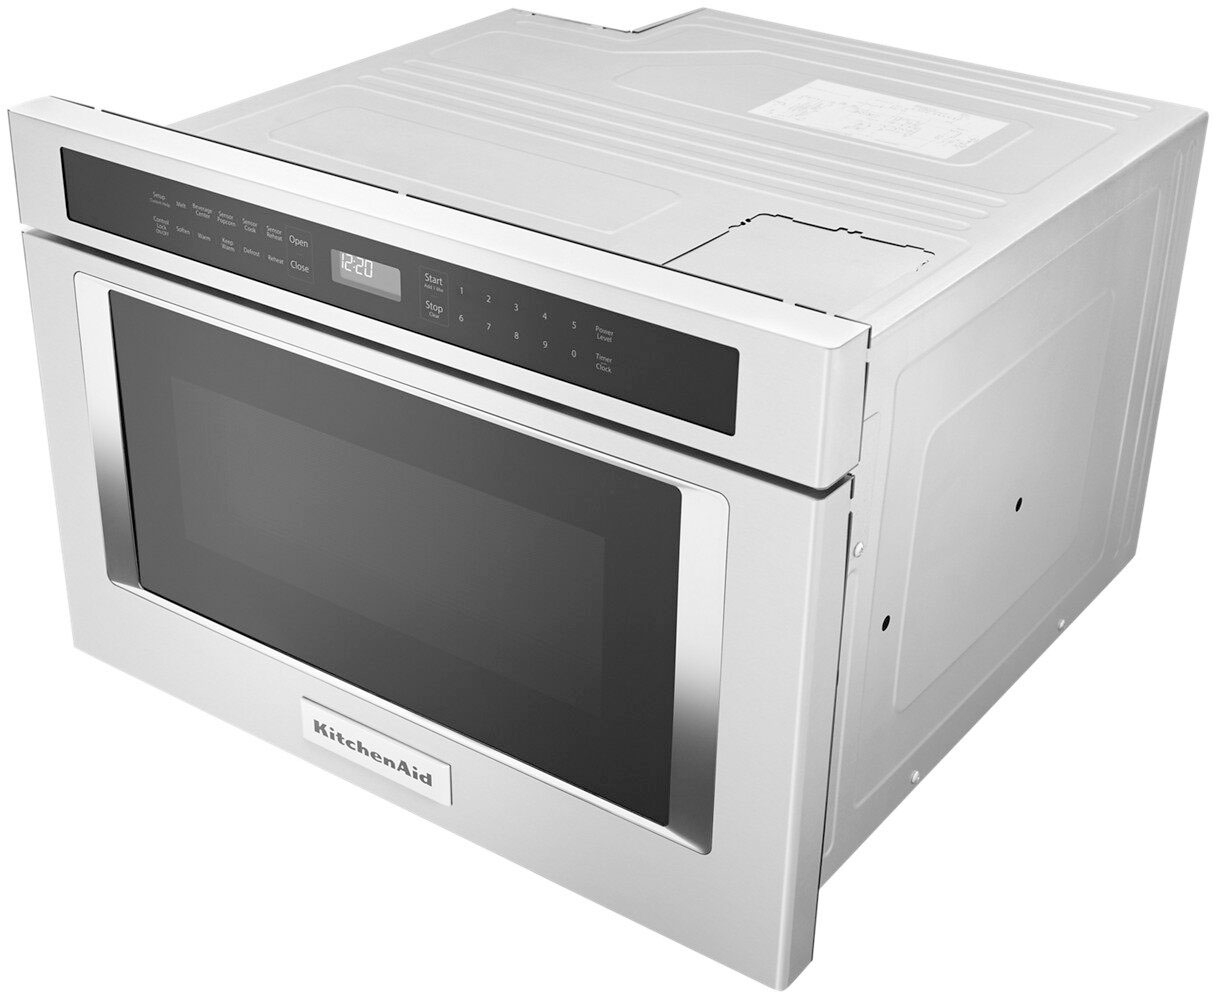 ON DISPLAY IN OUR PAWTUCKET SHOWROOM 24 Inch Microwave Drawer with 1.2 Cu.  Ft. Capacity, 1000W Power, 10 Cooking Modes, Sensor Cook, Quickstart